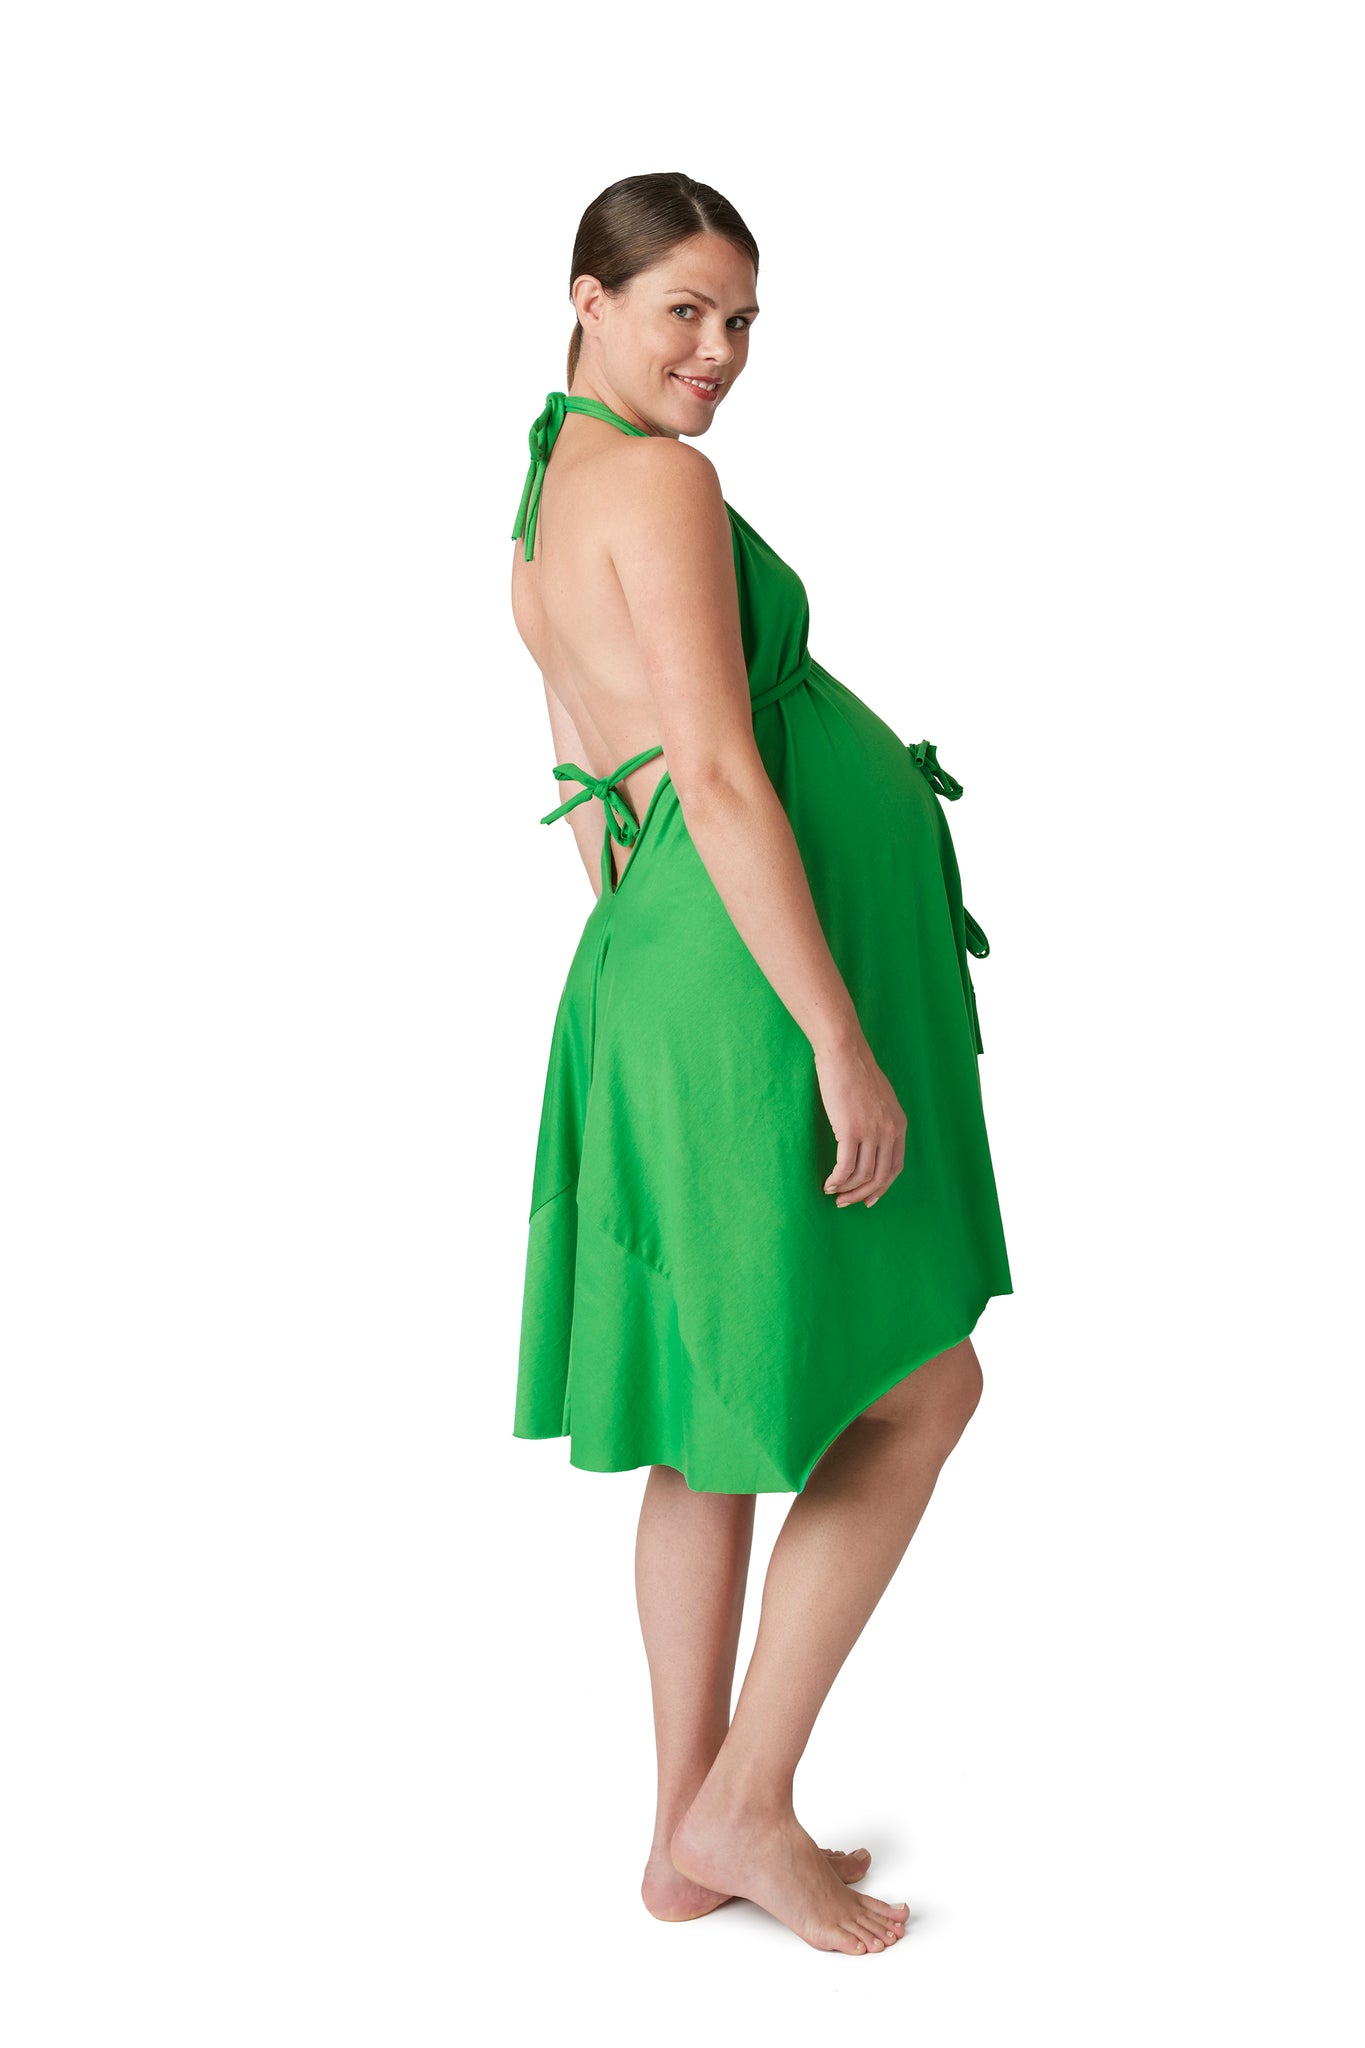 Pretty Pushers Delivery Gowns, Labor & Delivery Gown